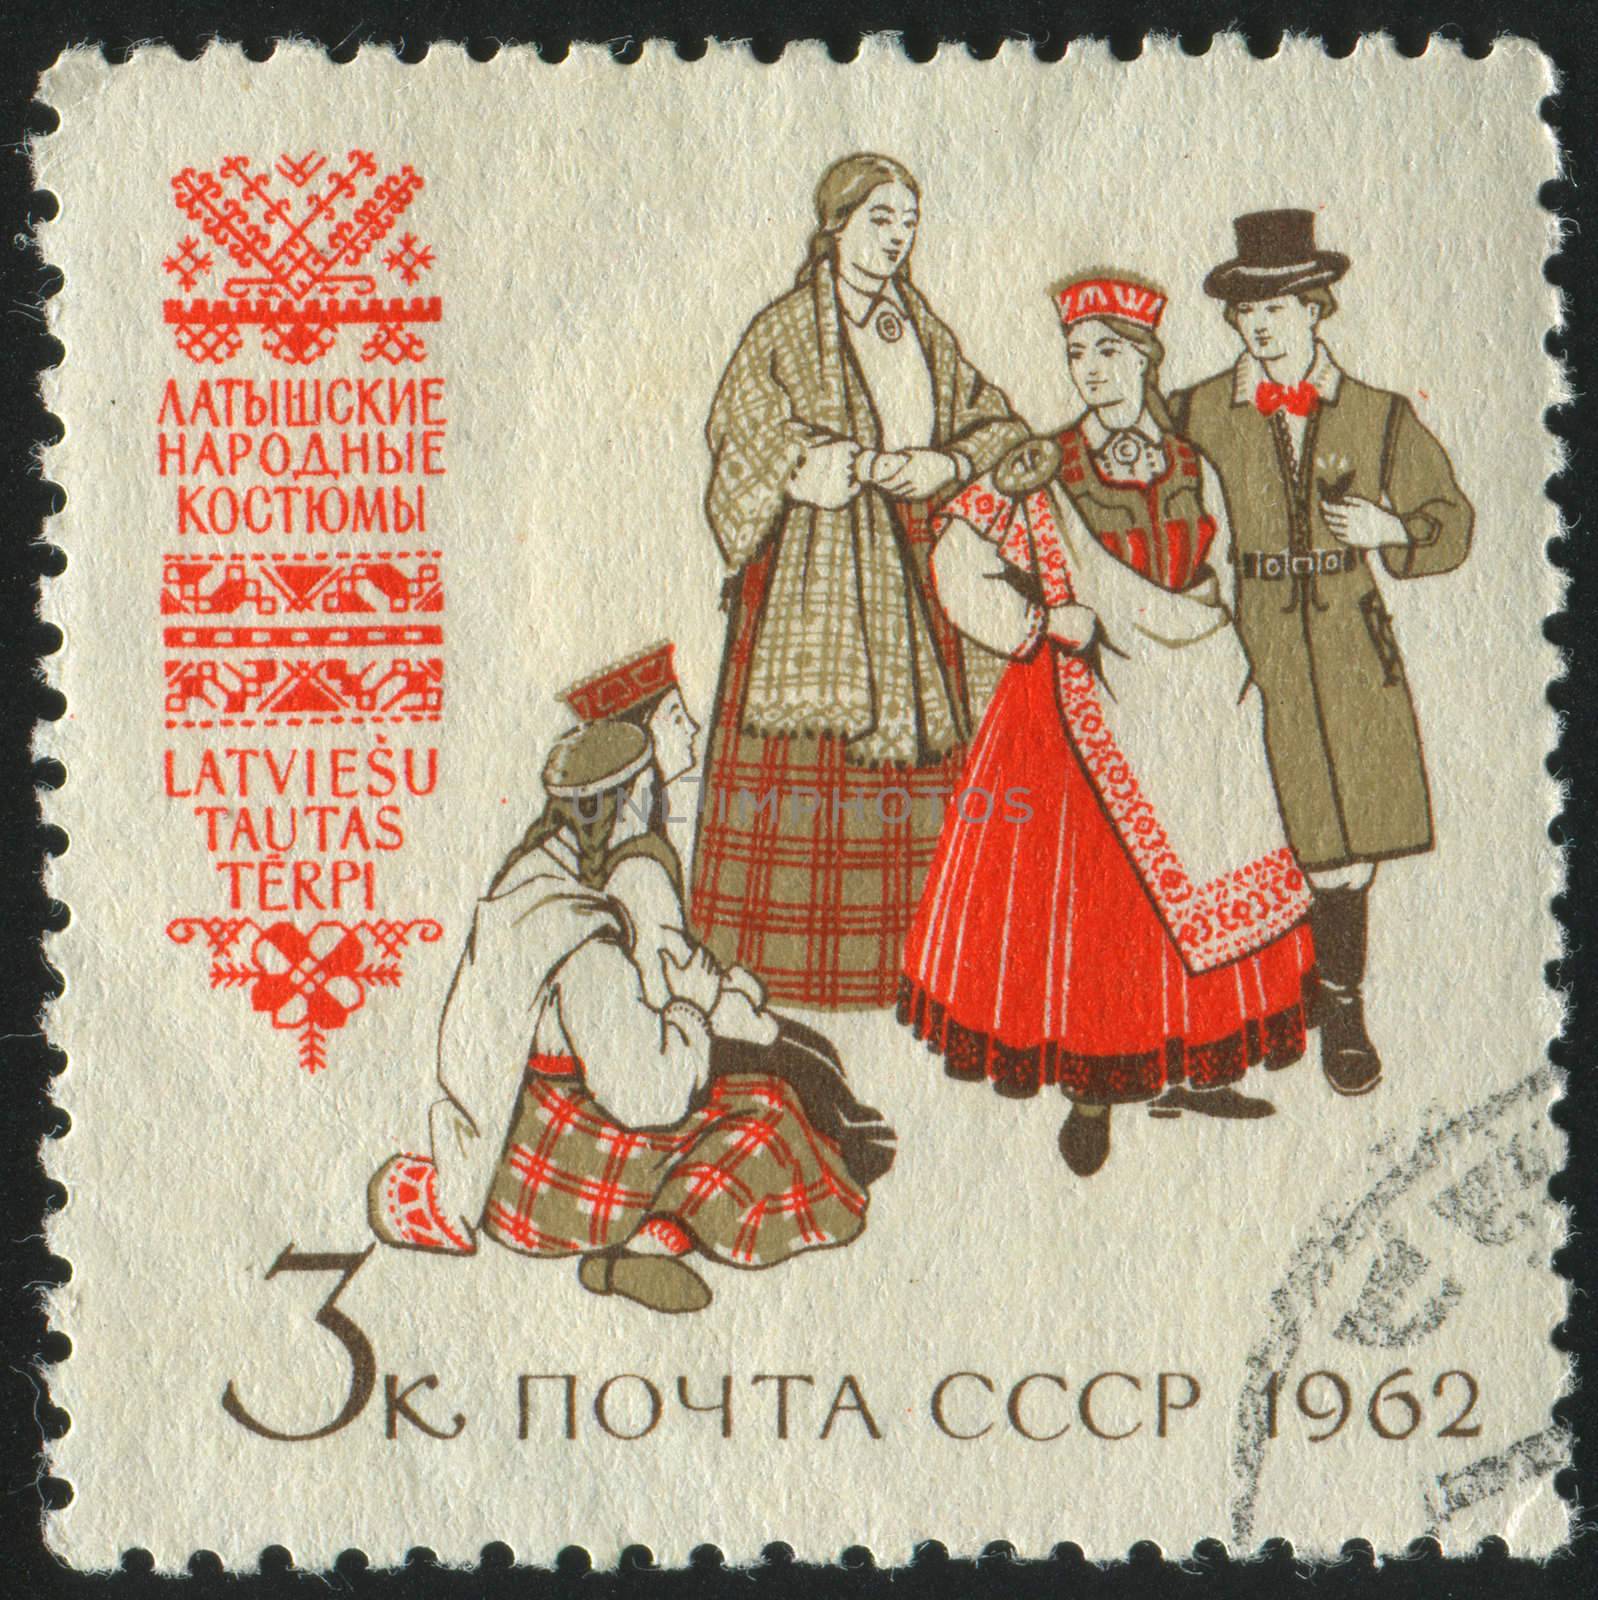 RUSSIA - CIRCA 1962: stamp printed by Russia, shows traditional costume, circa 1962.